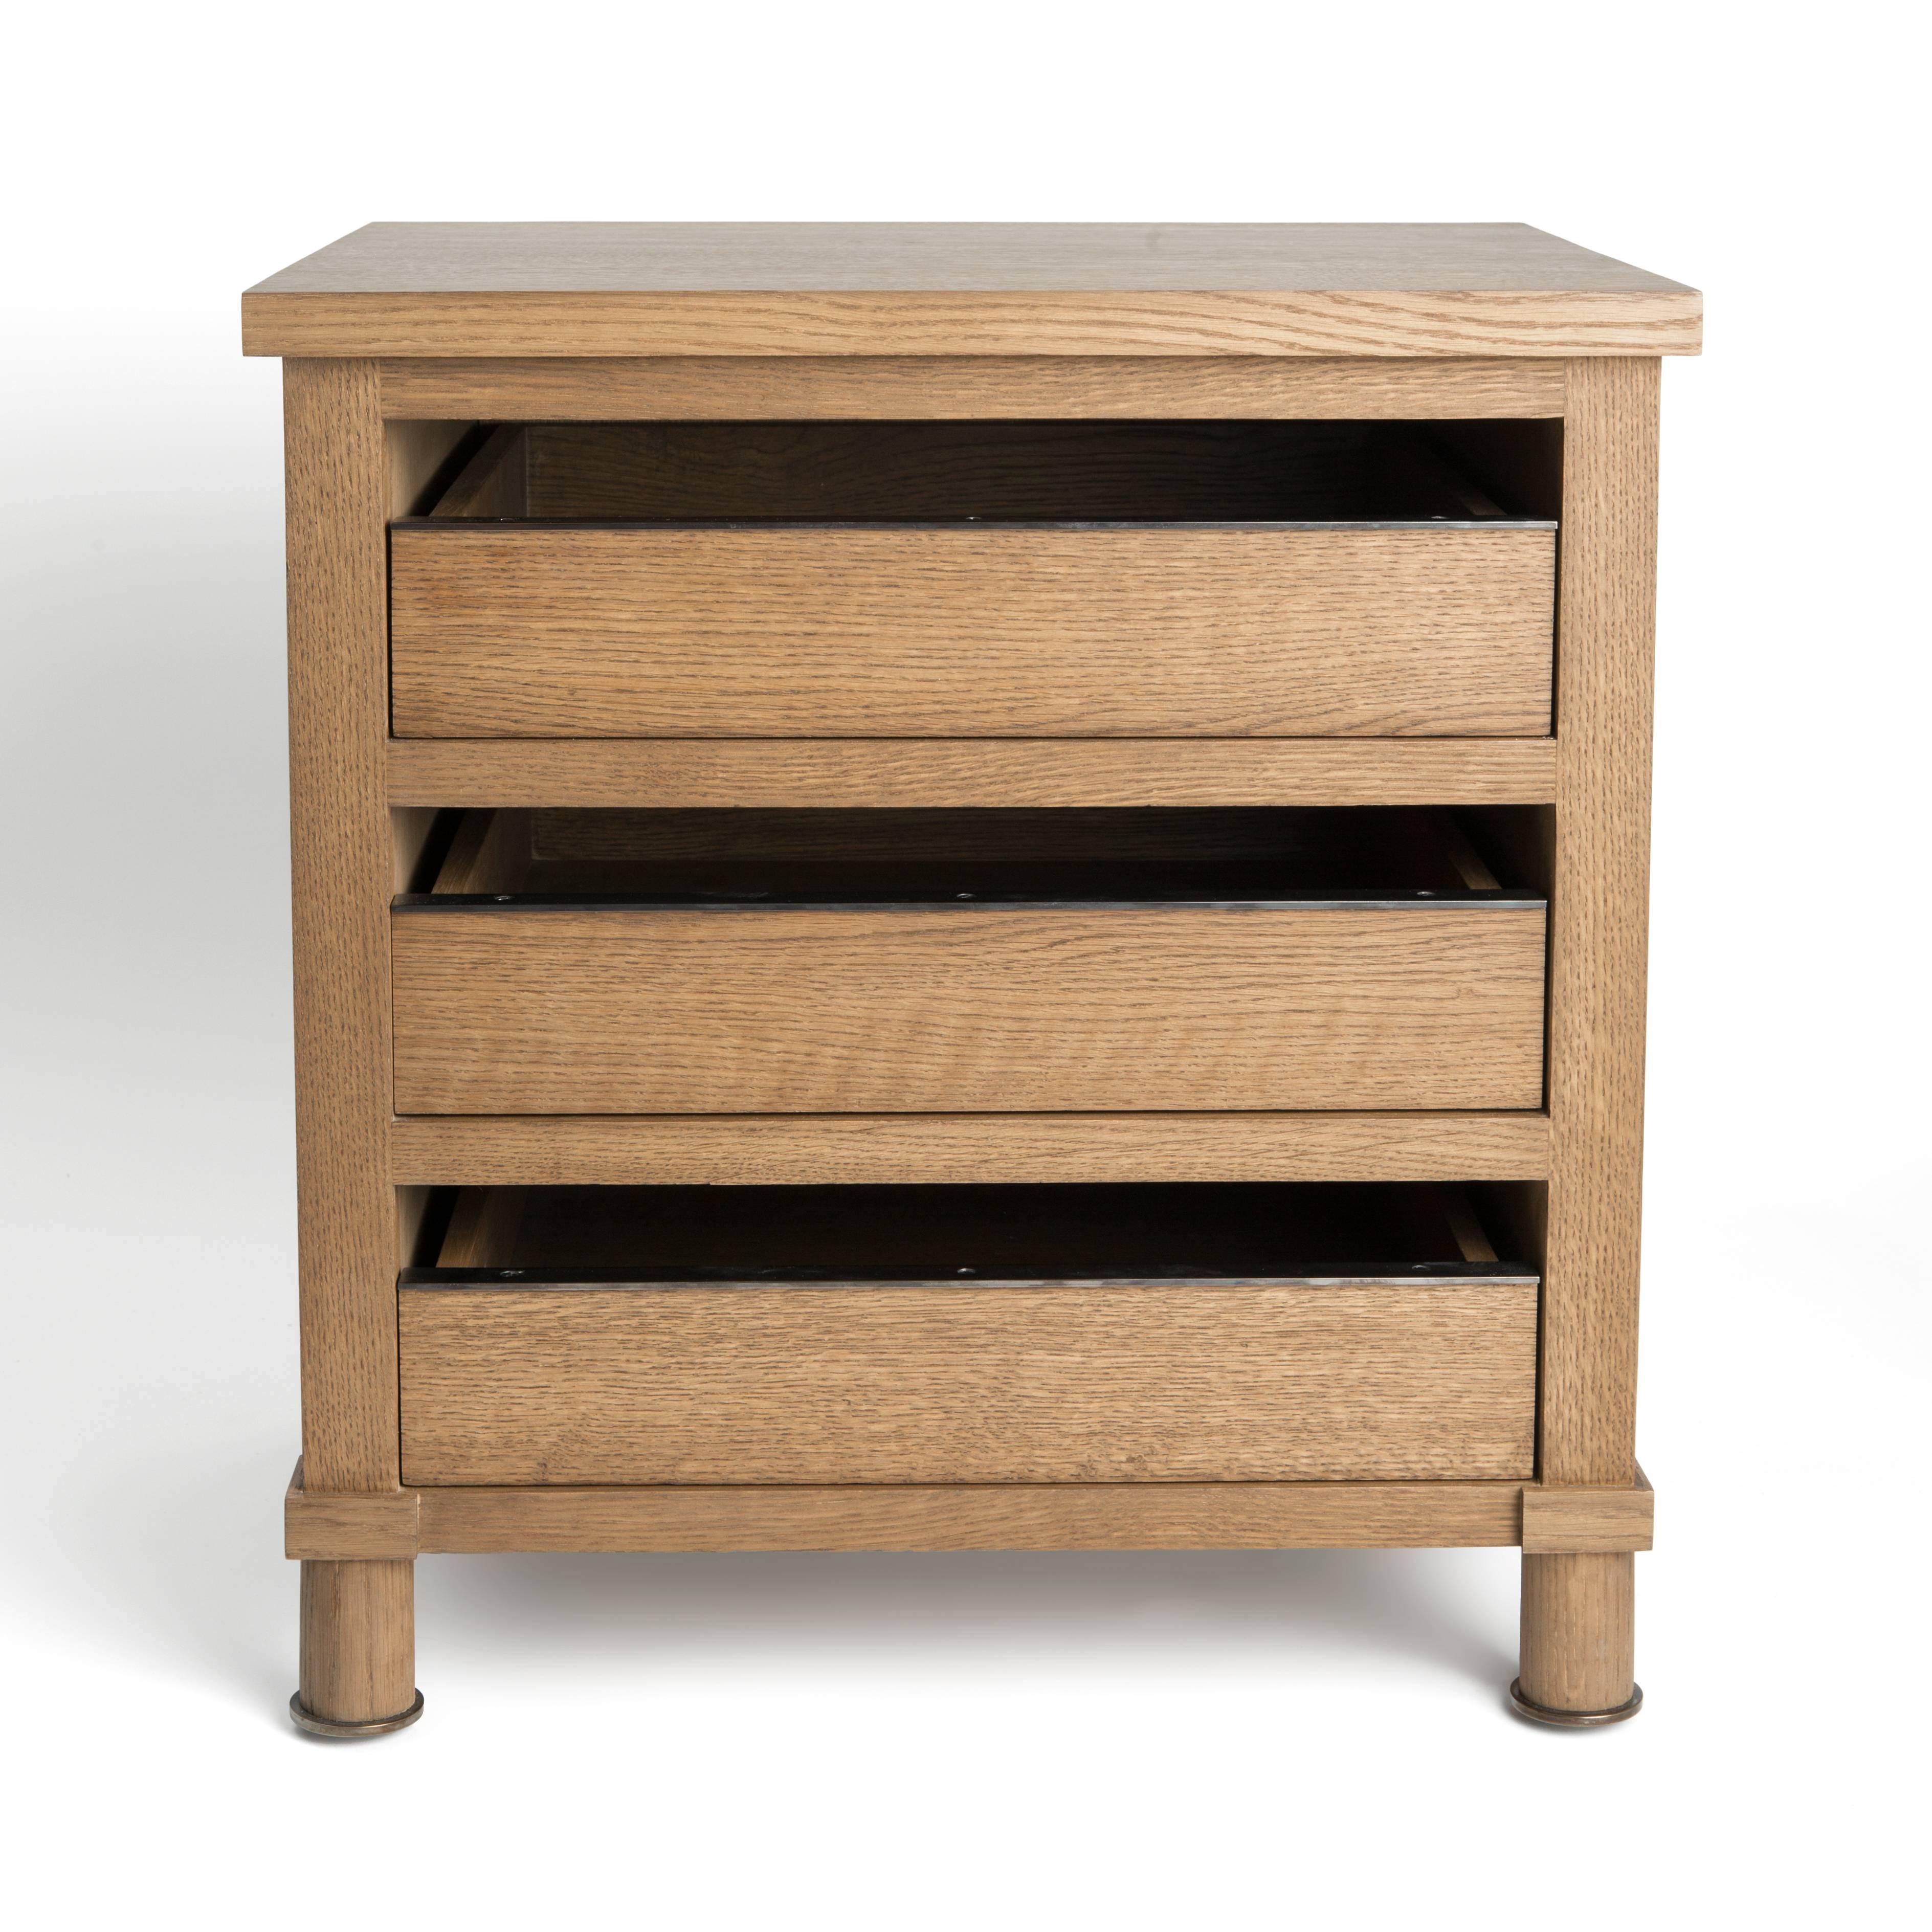 An original FERRER design with oak and bronze details.

Functions nicely as a side table, nightstand, chest of drawers or flat file cabinet.

We welcome inquires for custom commissions. 